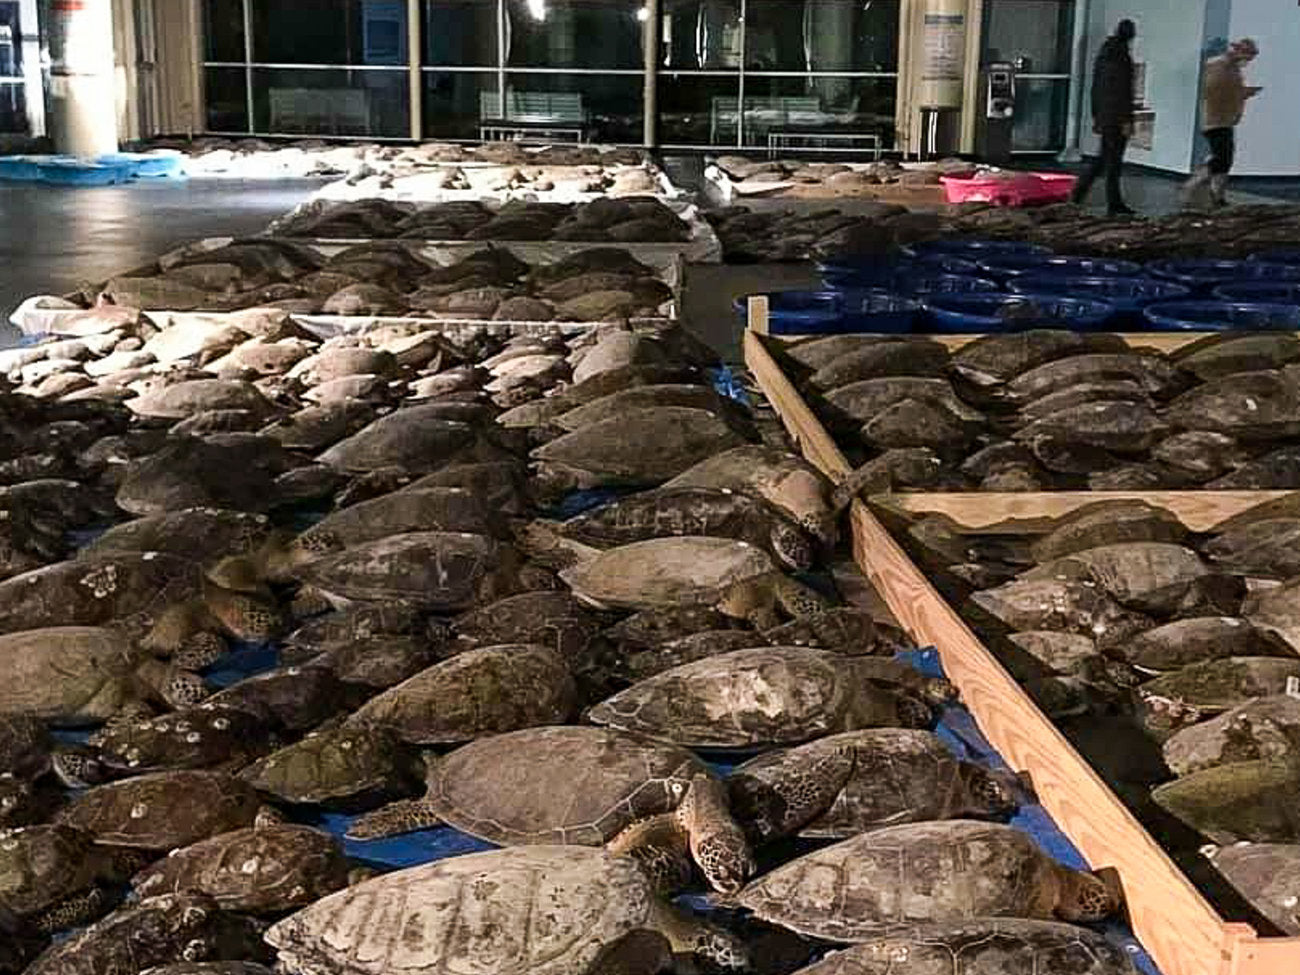 SpaceX Provides Power Generator to Save Cold-stunned Sea Turtles in South Texas